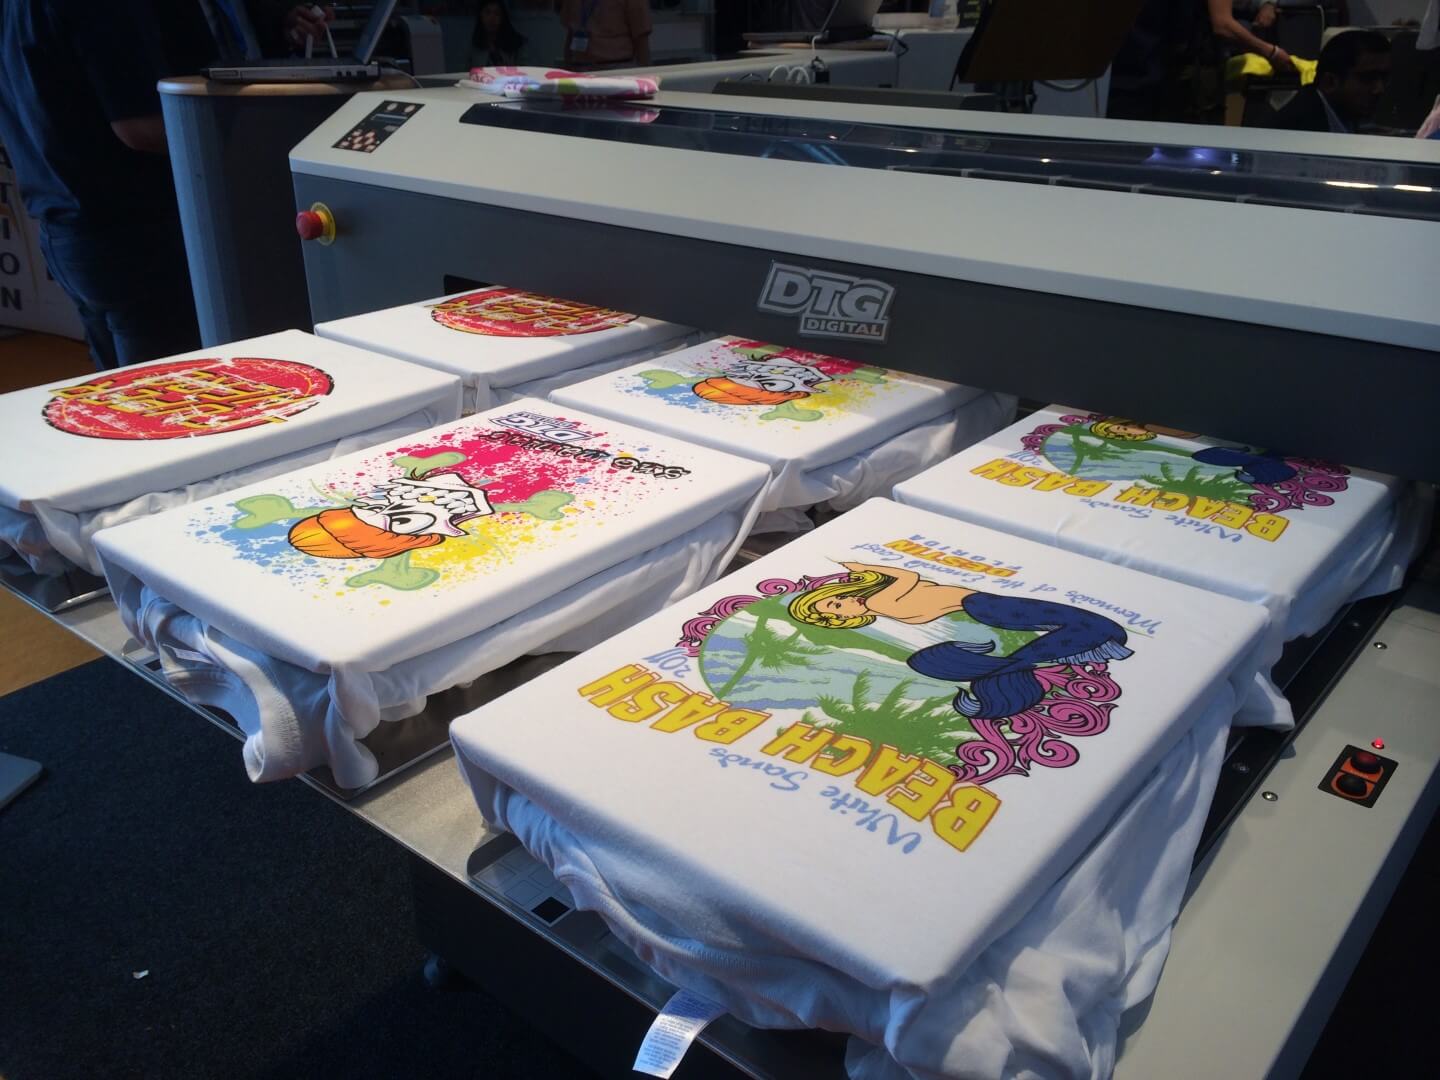 How To Choose The Right T-Shirt Printing Company – The Checklist